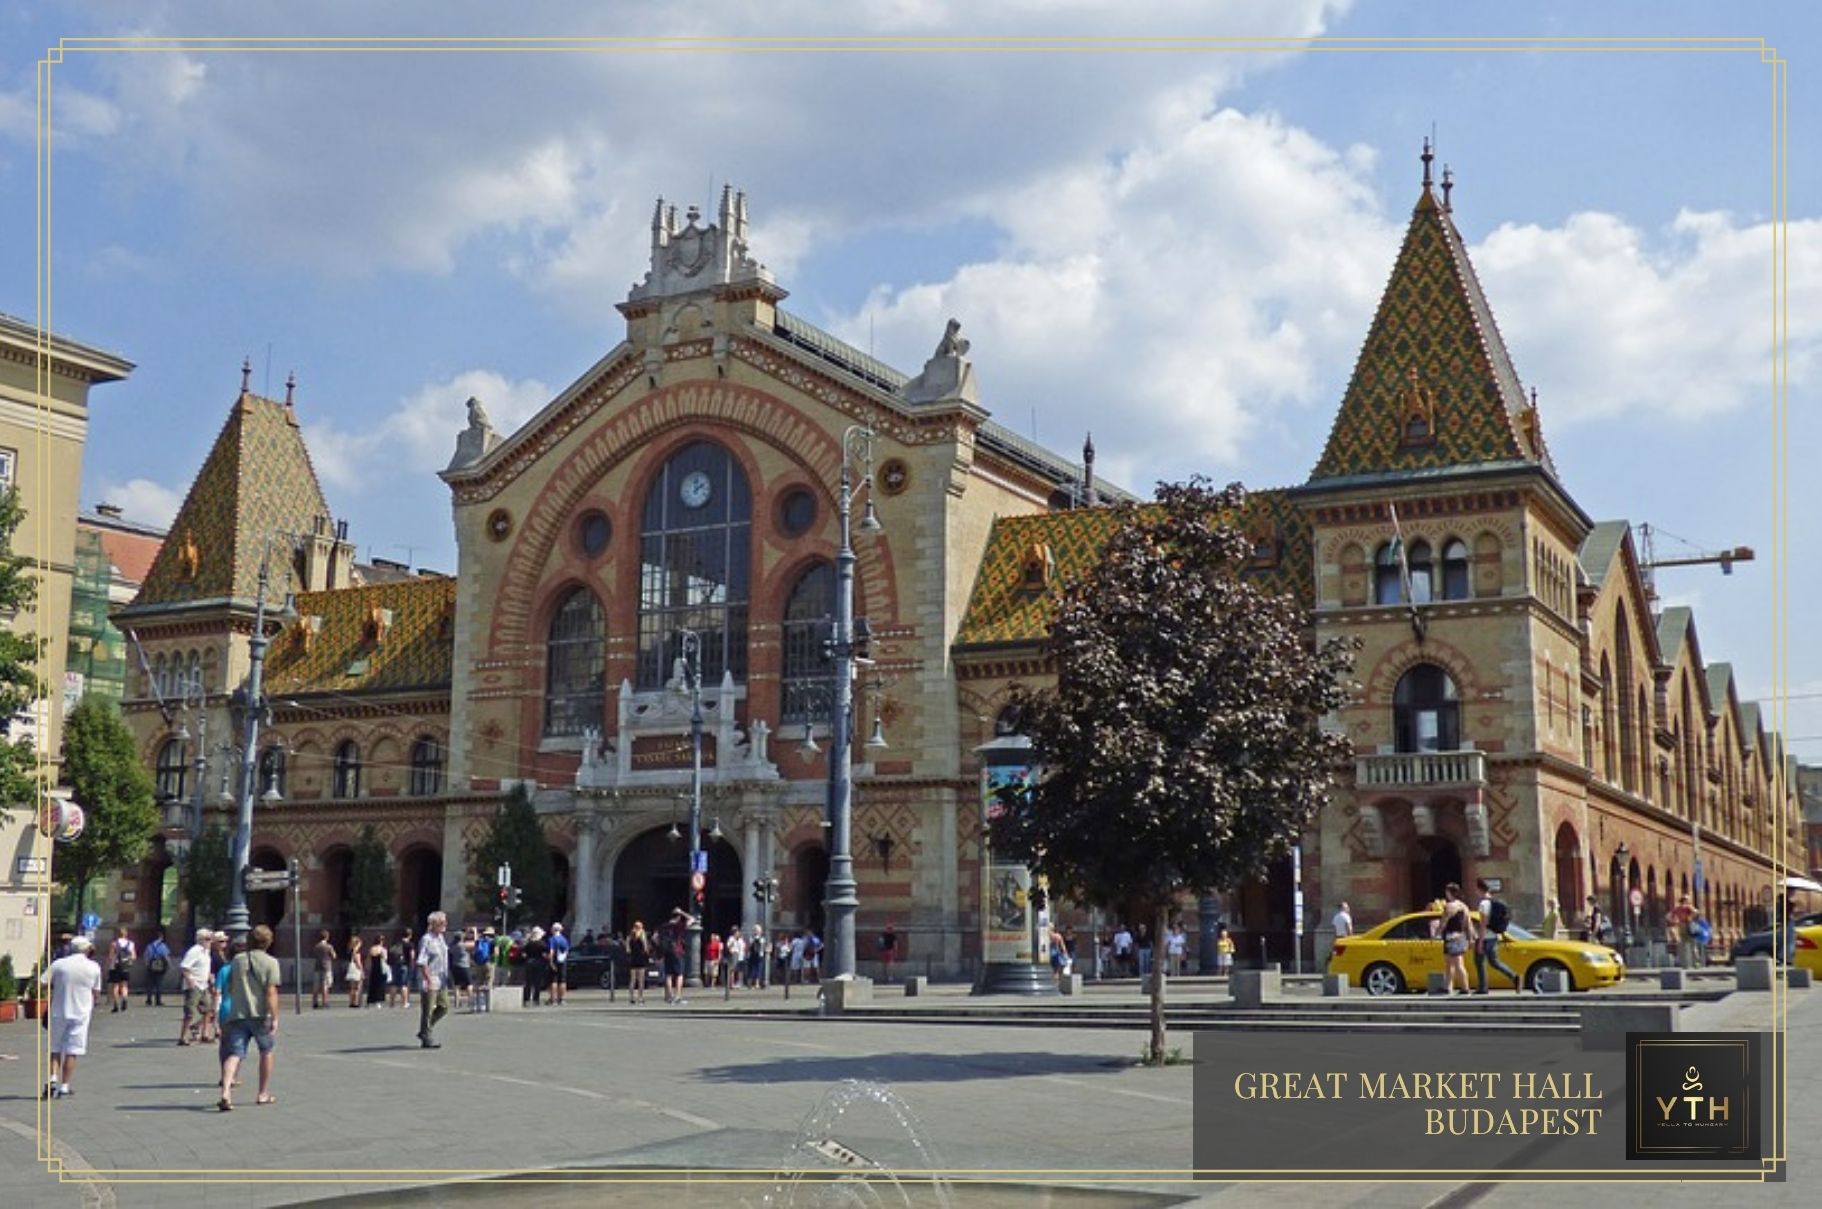 Great Market Hall in Budapest, Hungary